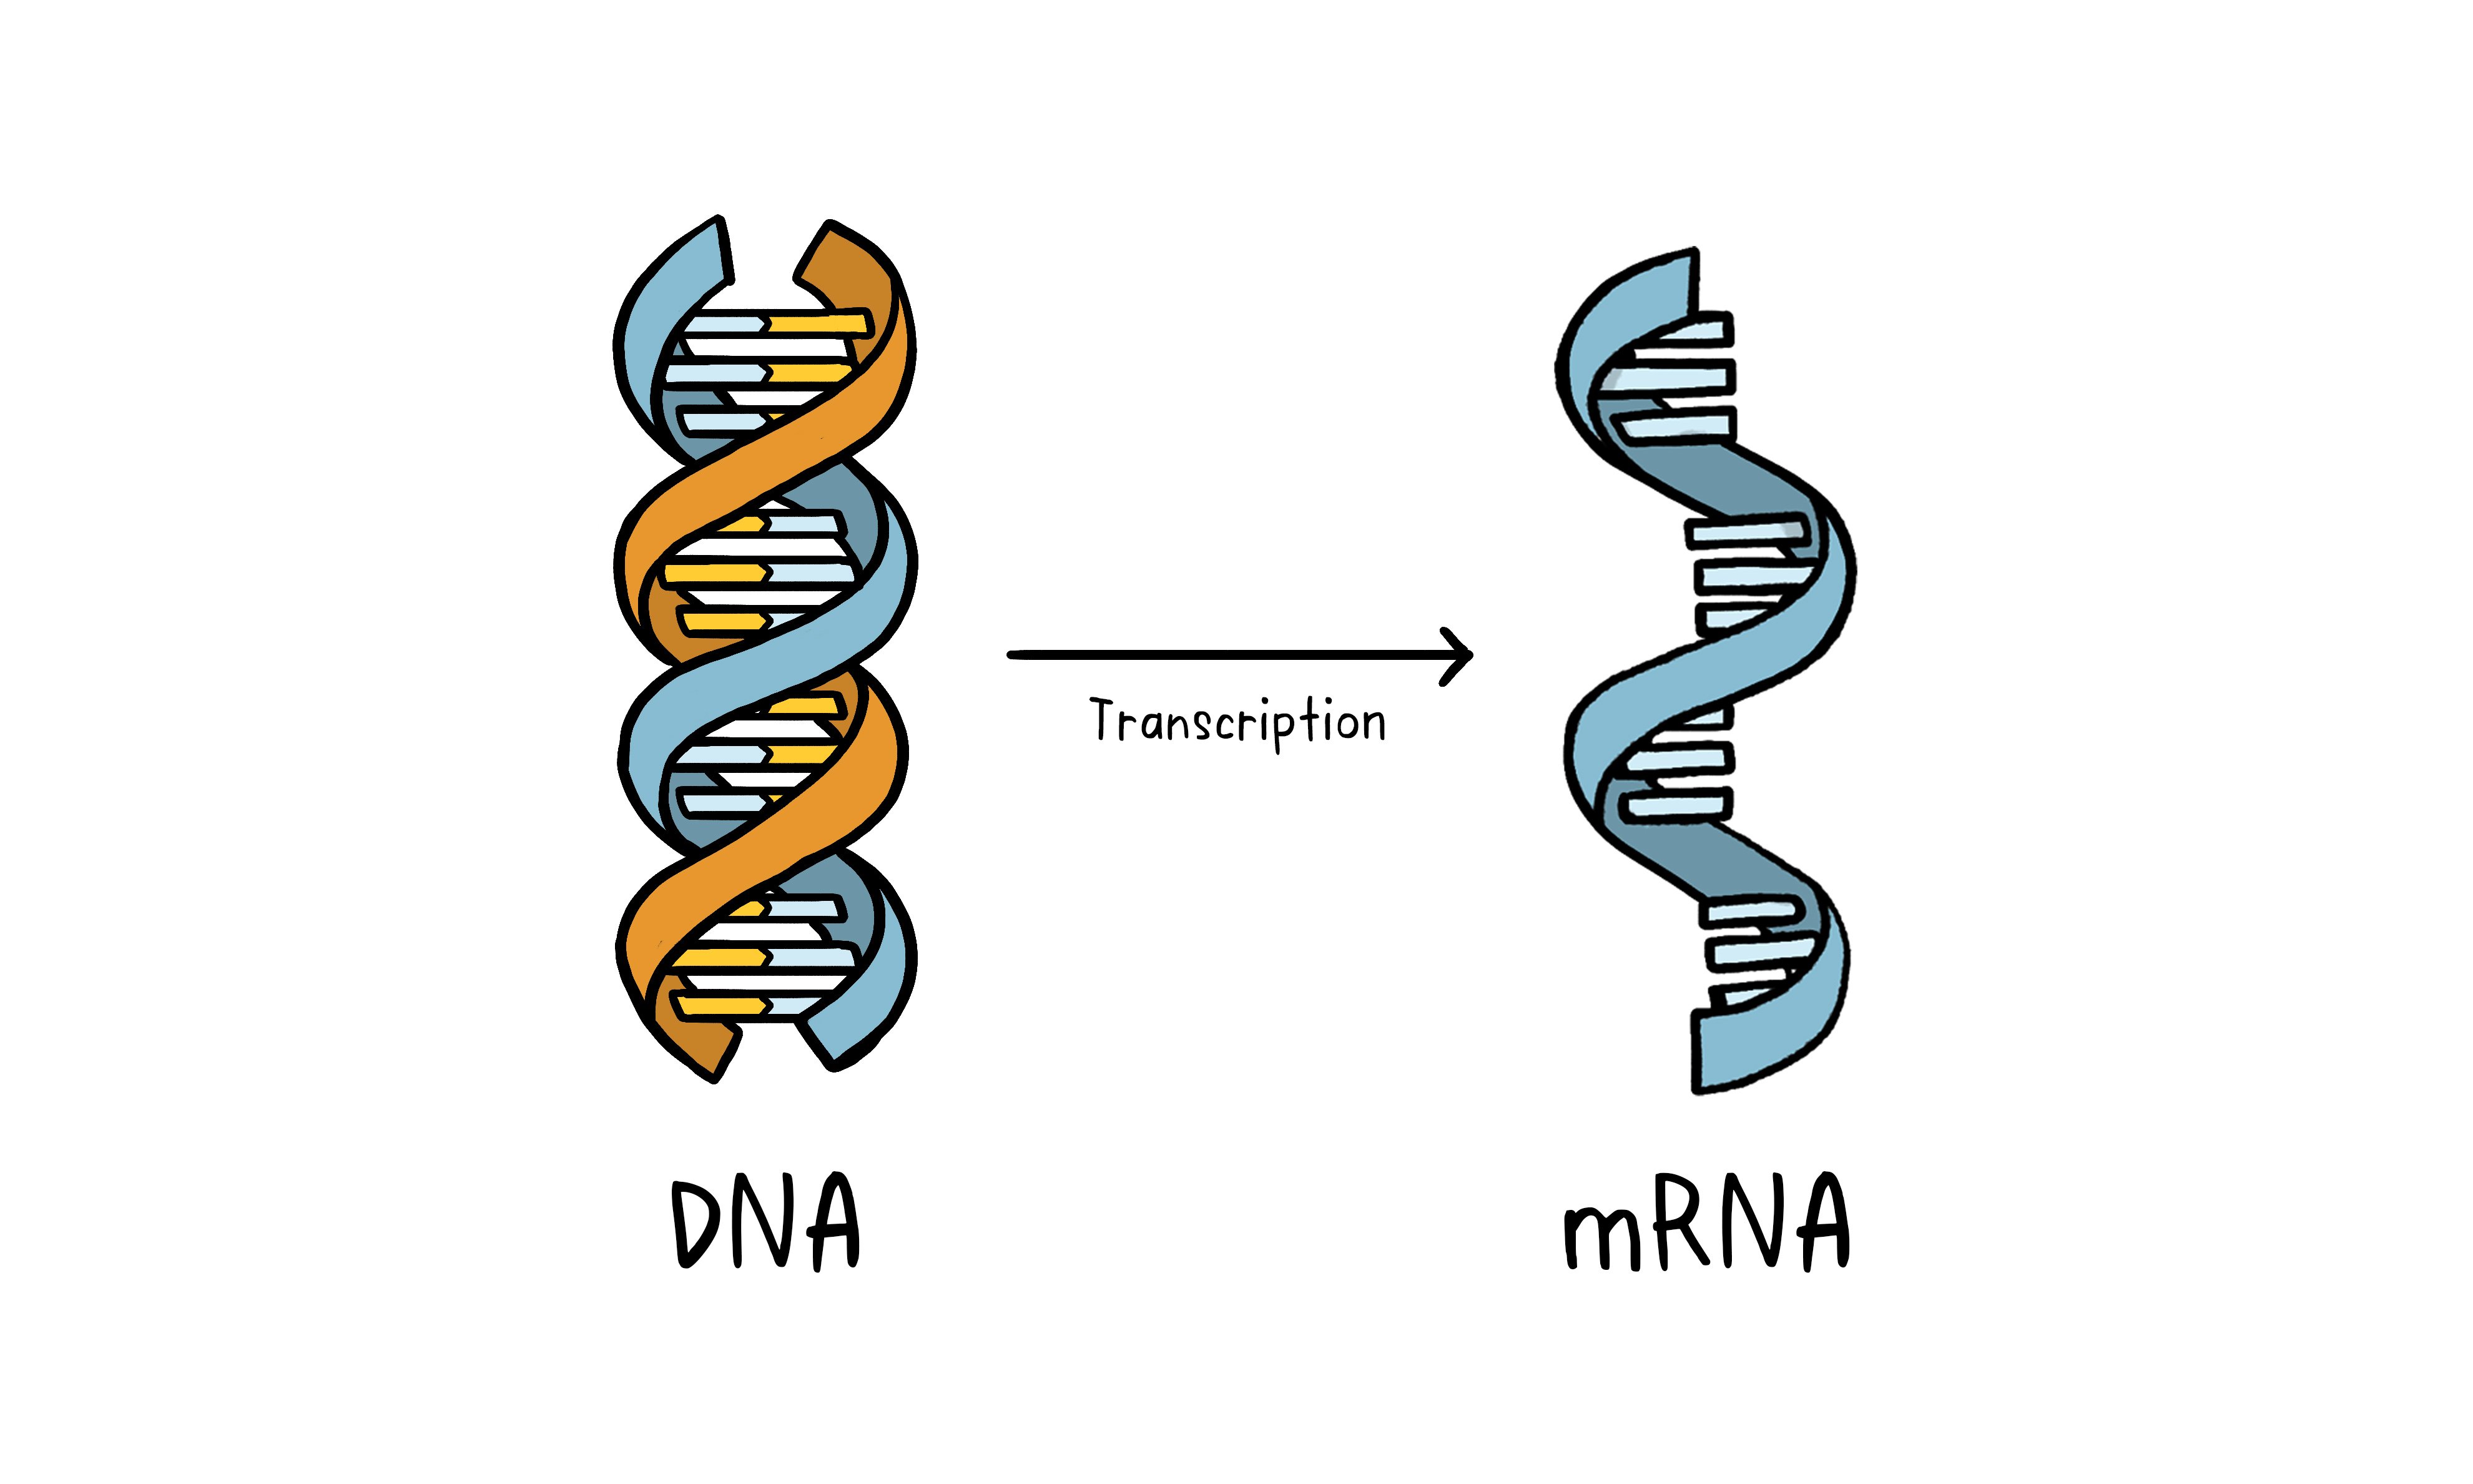 mRNA and DNA